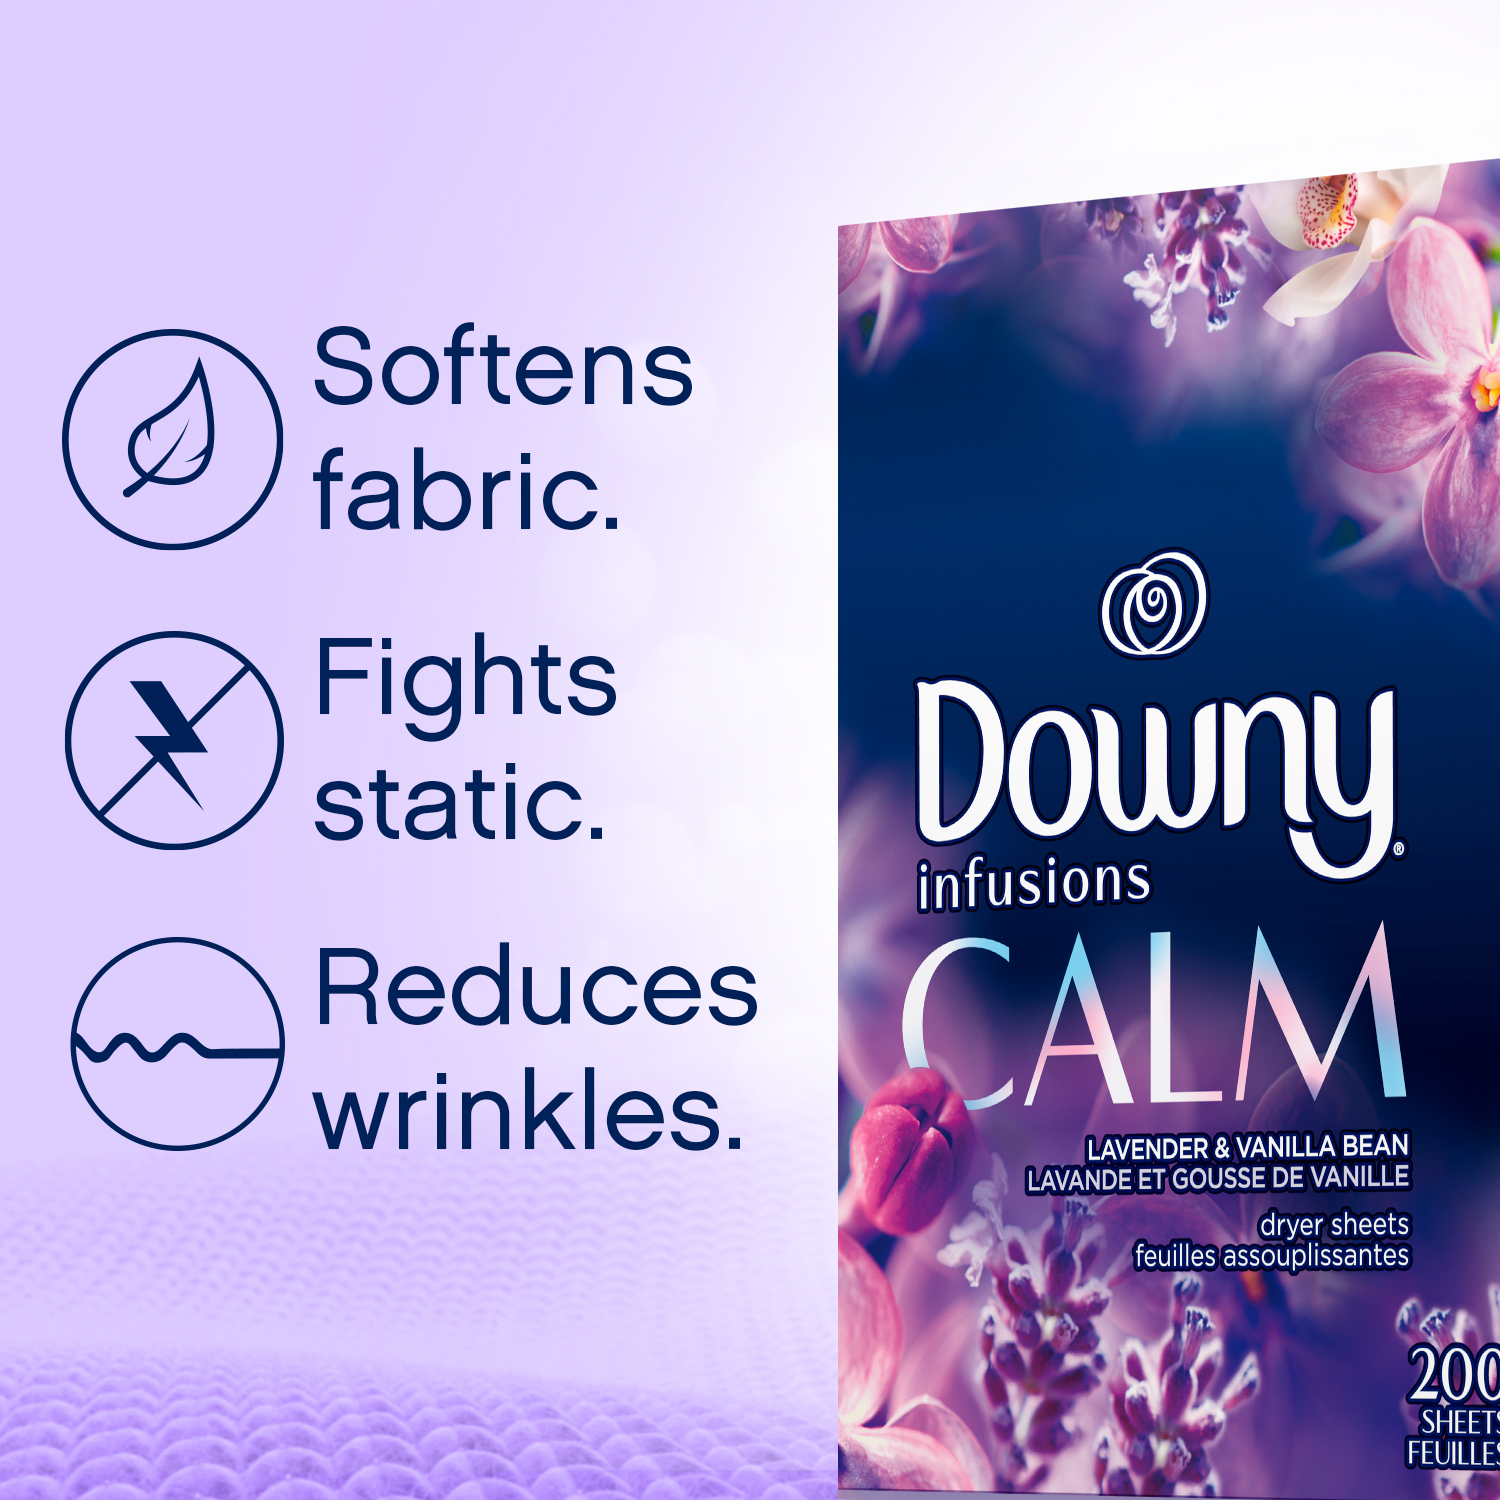 Downy Infusions Dryer Sheets, Calm, Lavender & Vanilla Bean, 105 ct - image 5 of 11